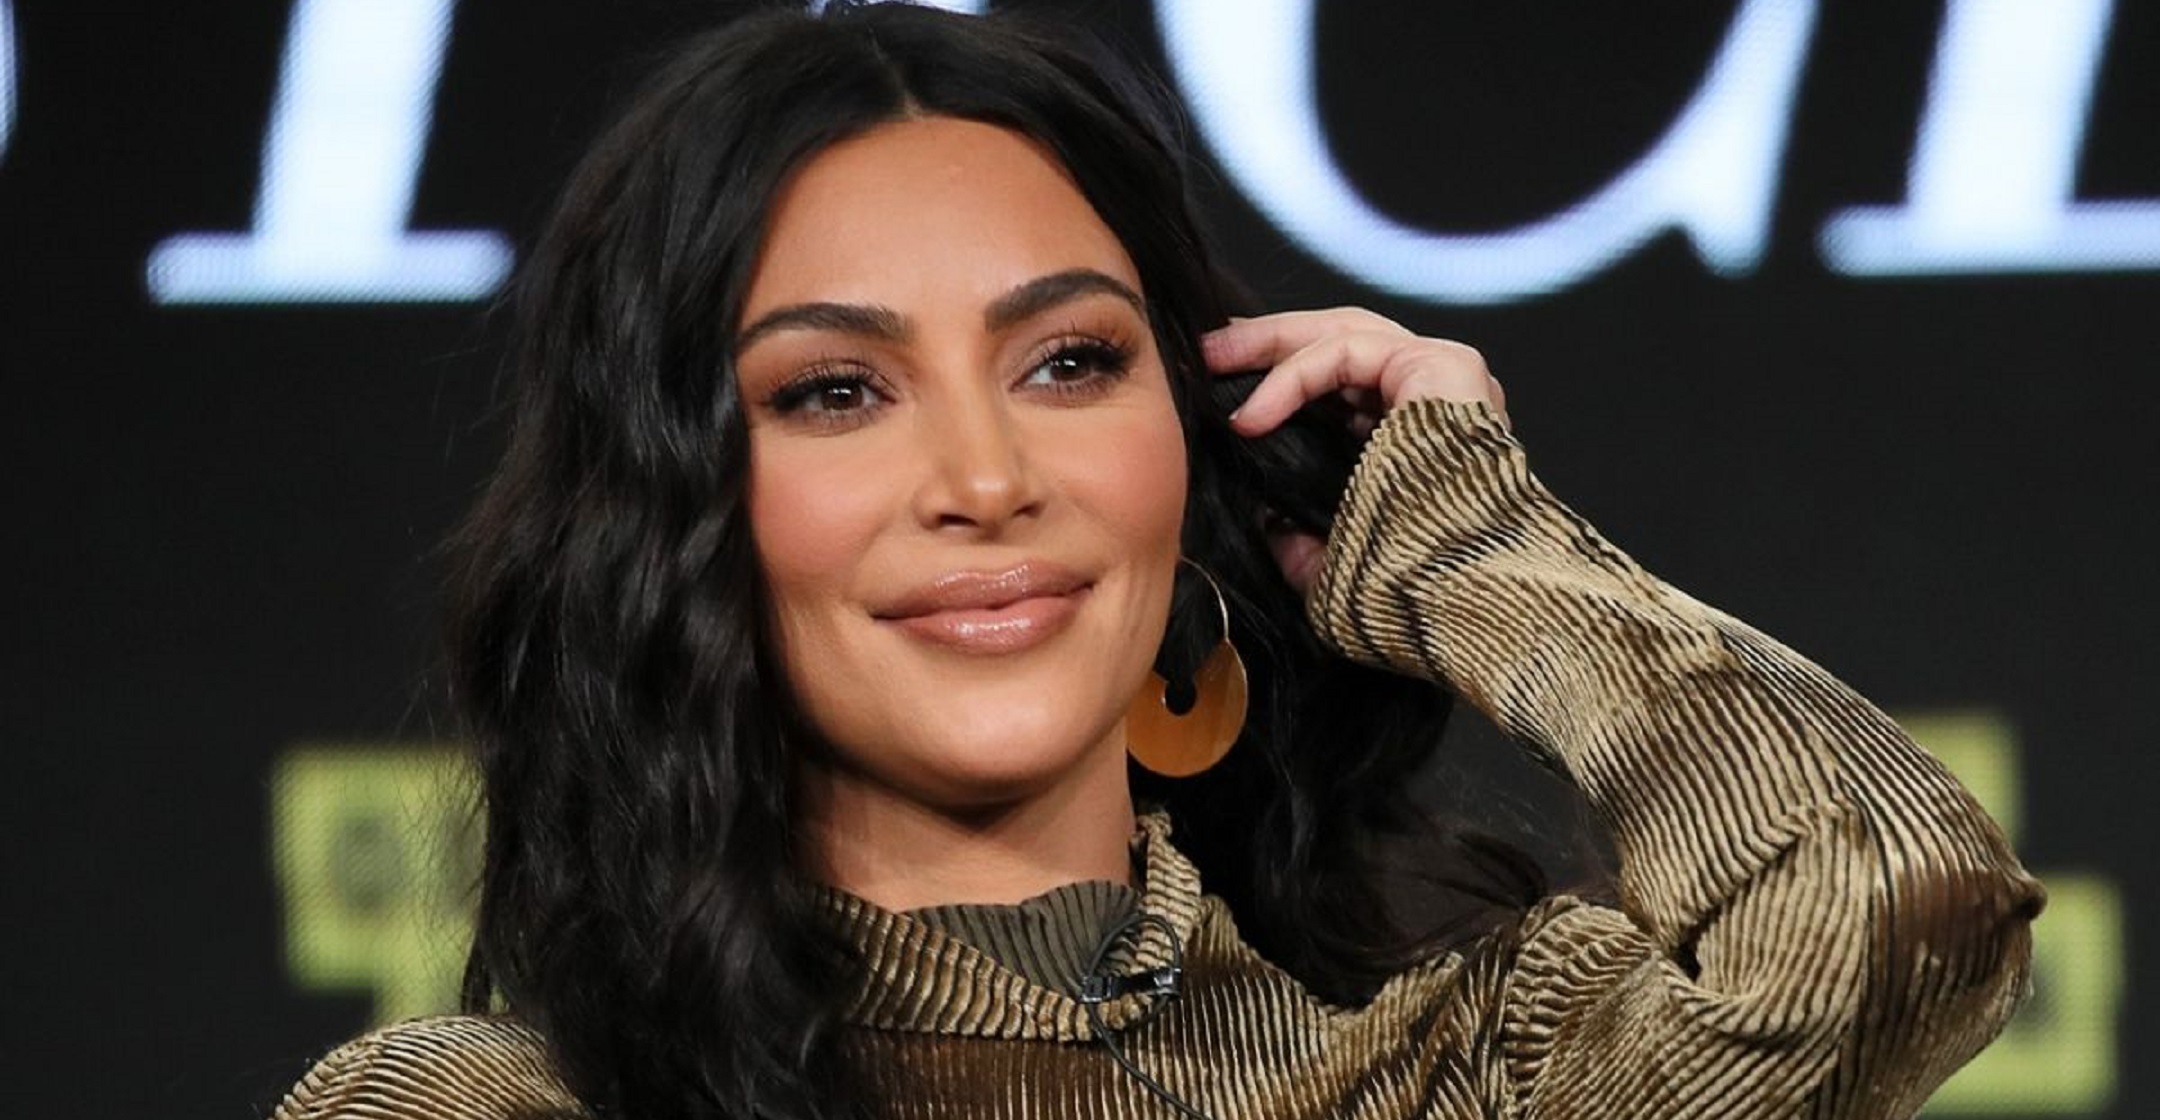 Kim Kardashian Named a ‘Billionaire’ By Forbes, ‘Not Bad For a Girl With No Talent’, She Writes